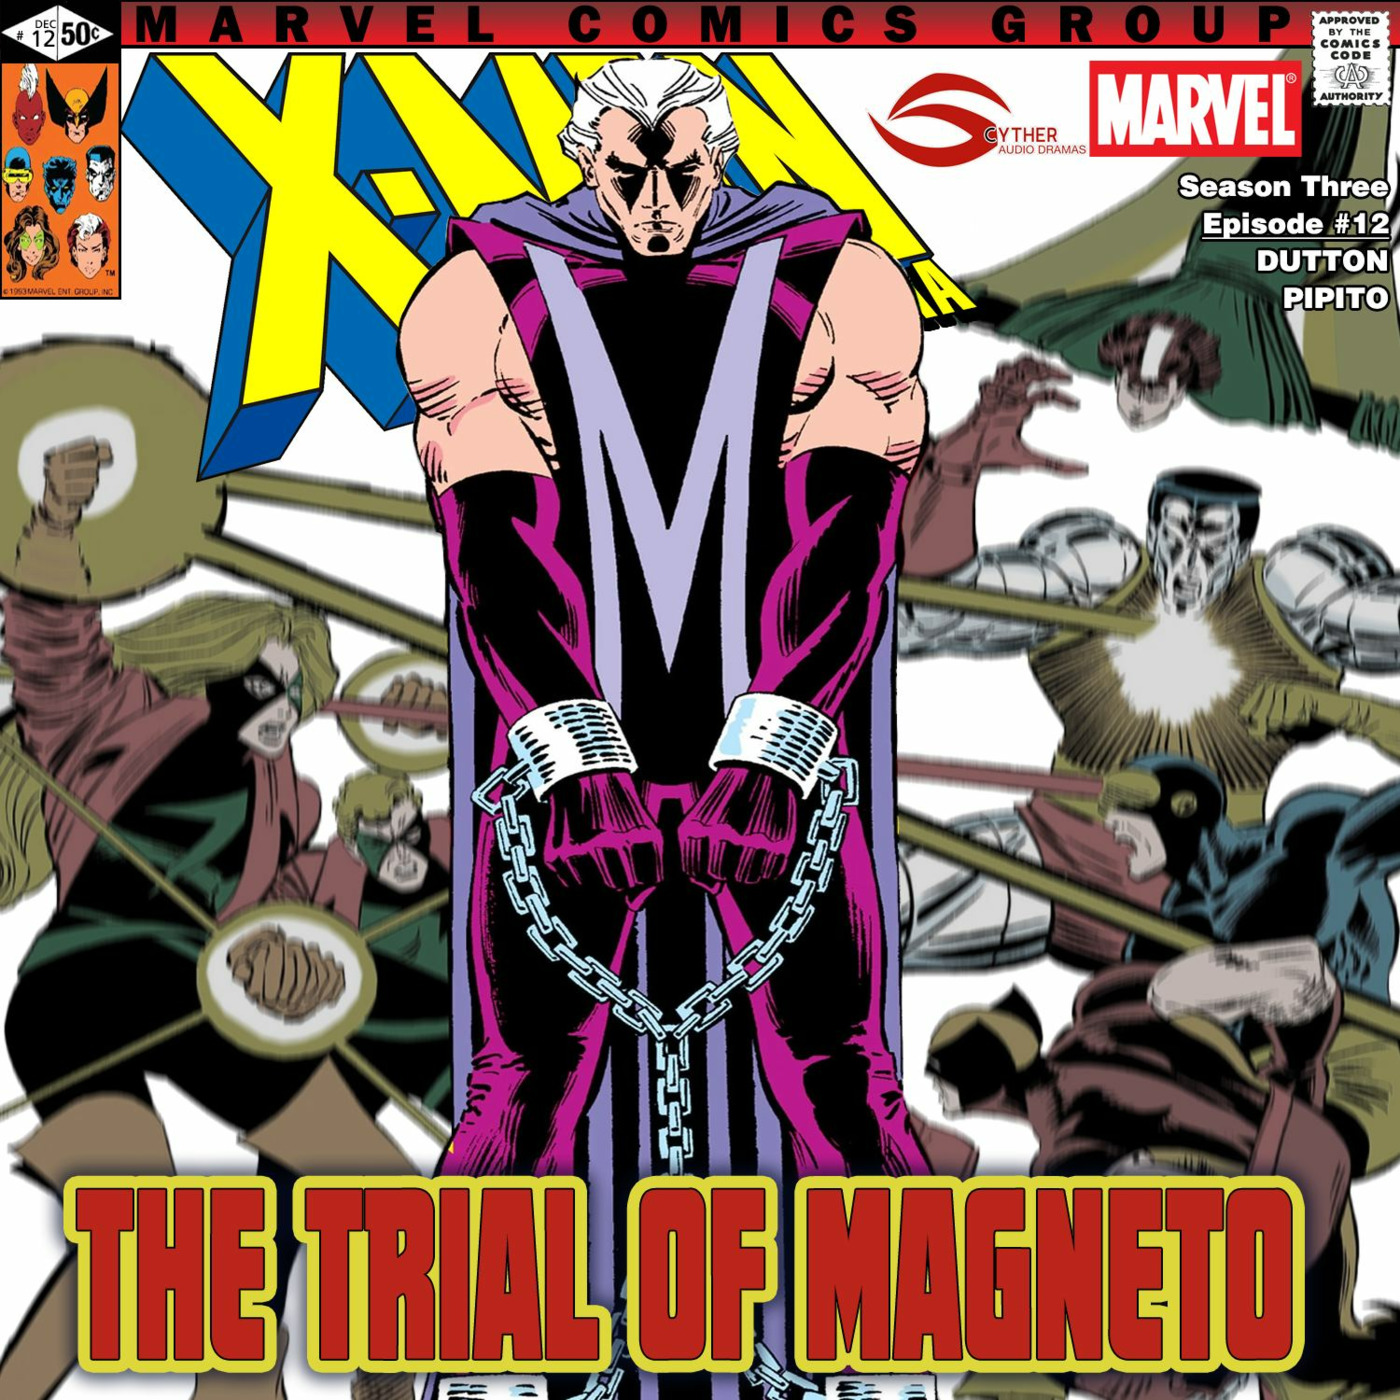 Episode 10: The Trial Of Magneto